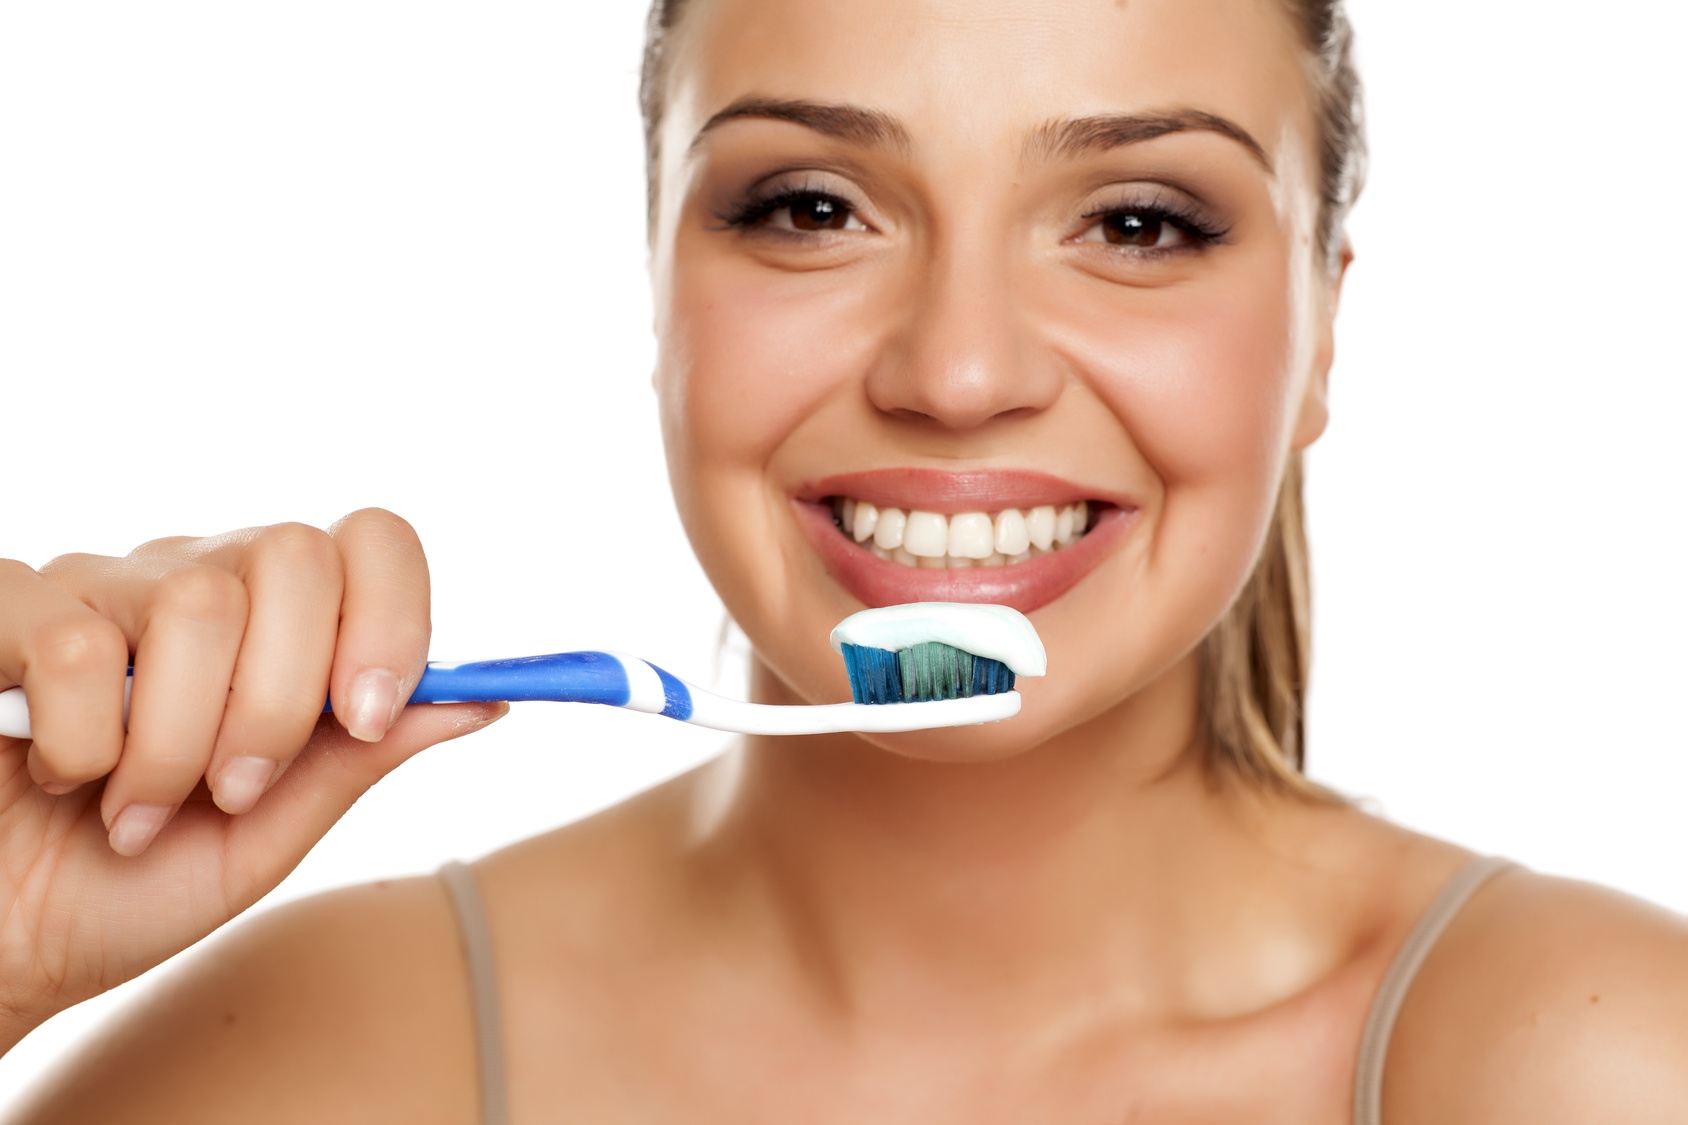 Brushing technique / teeth cleaning technique